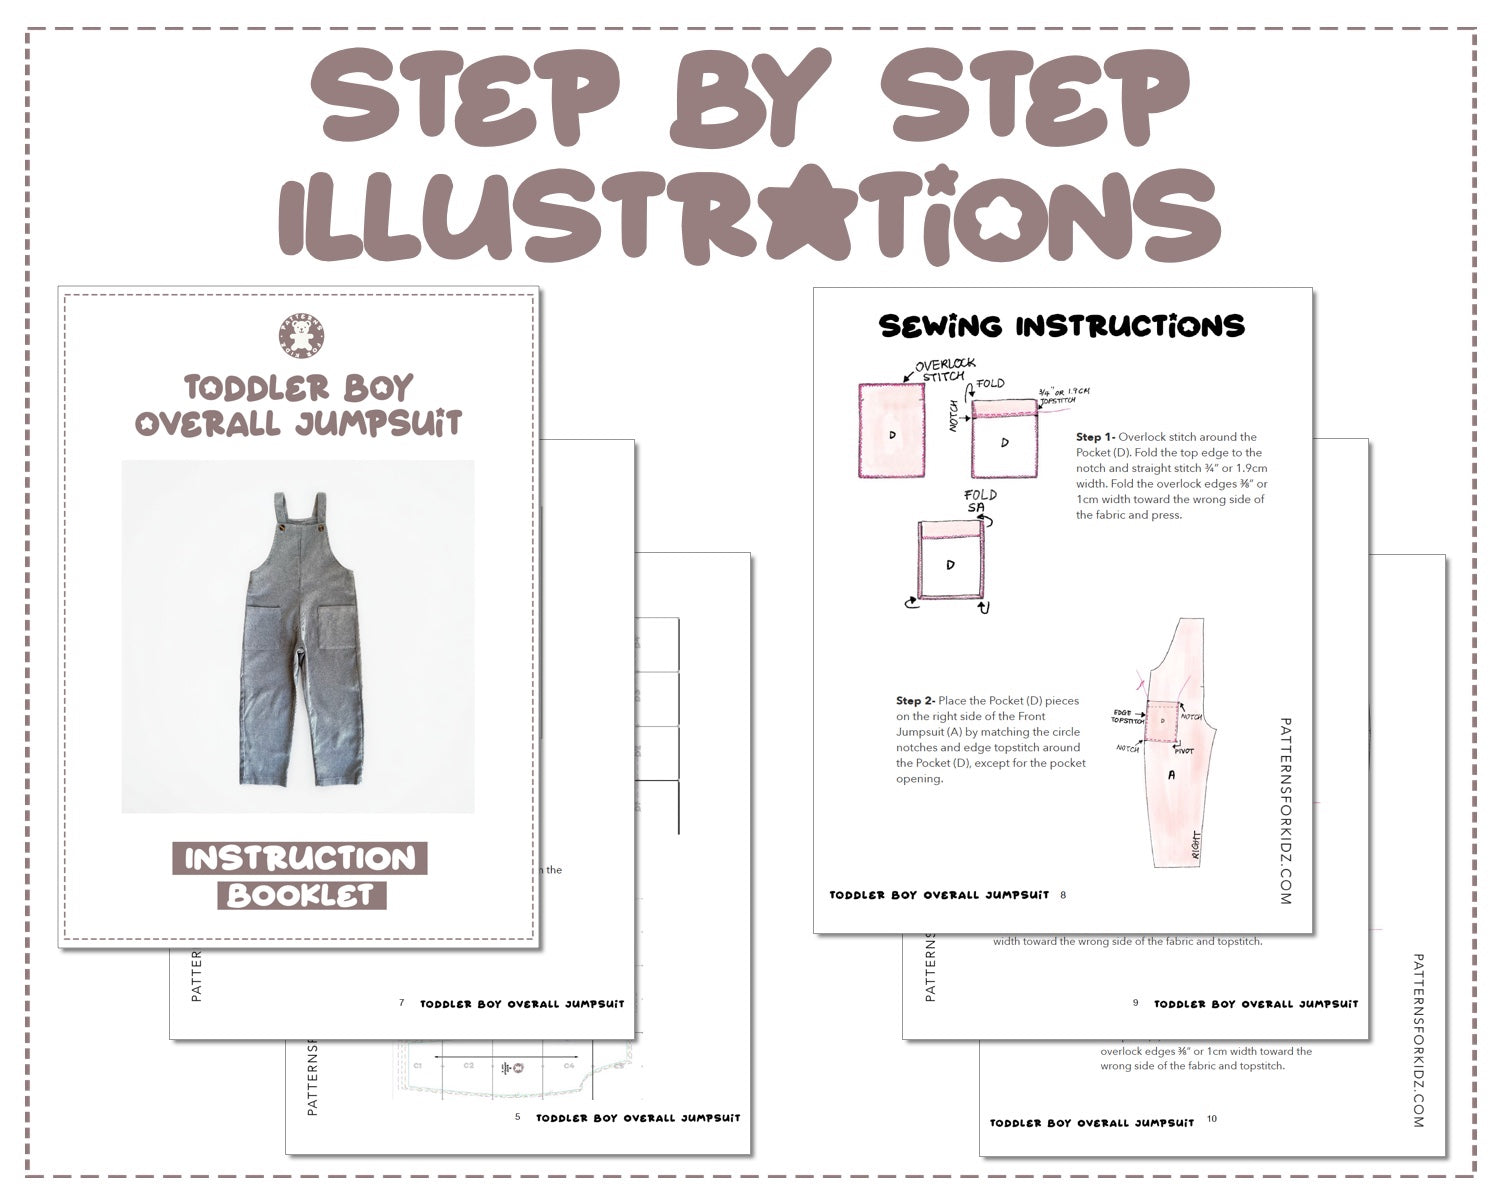 Toddler Boy Pocket Overall Jumpsuit sewing pattern step by step illustrations.